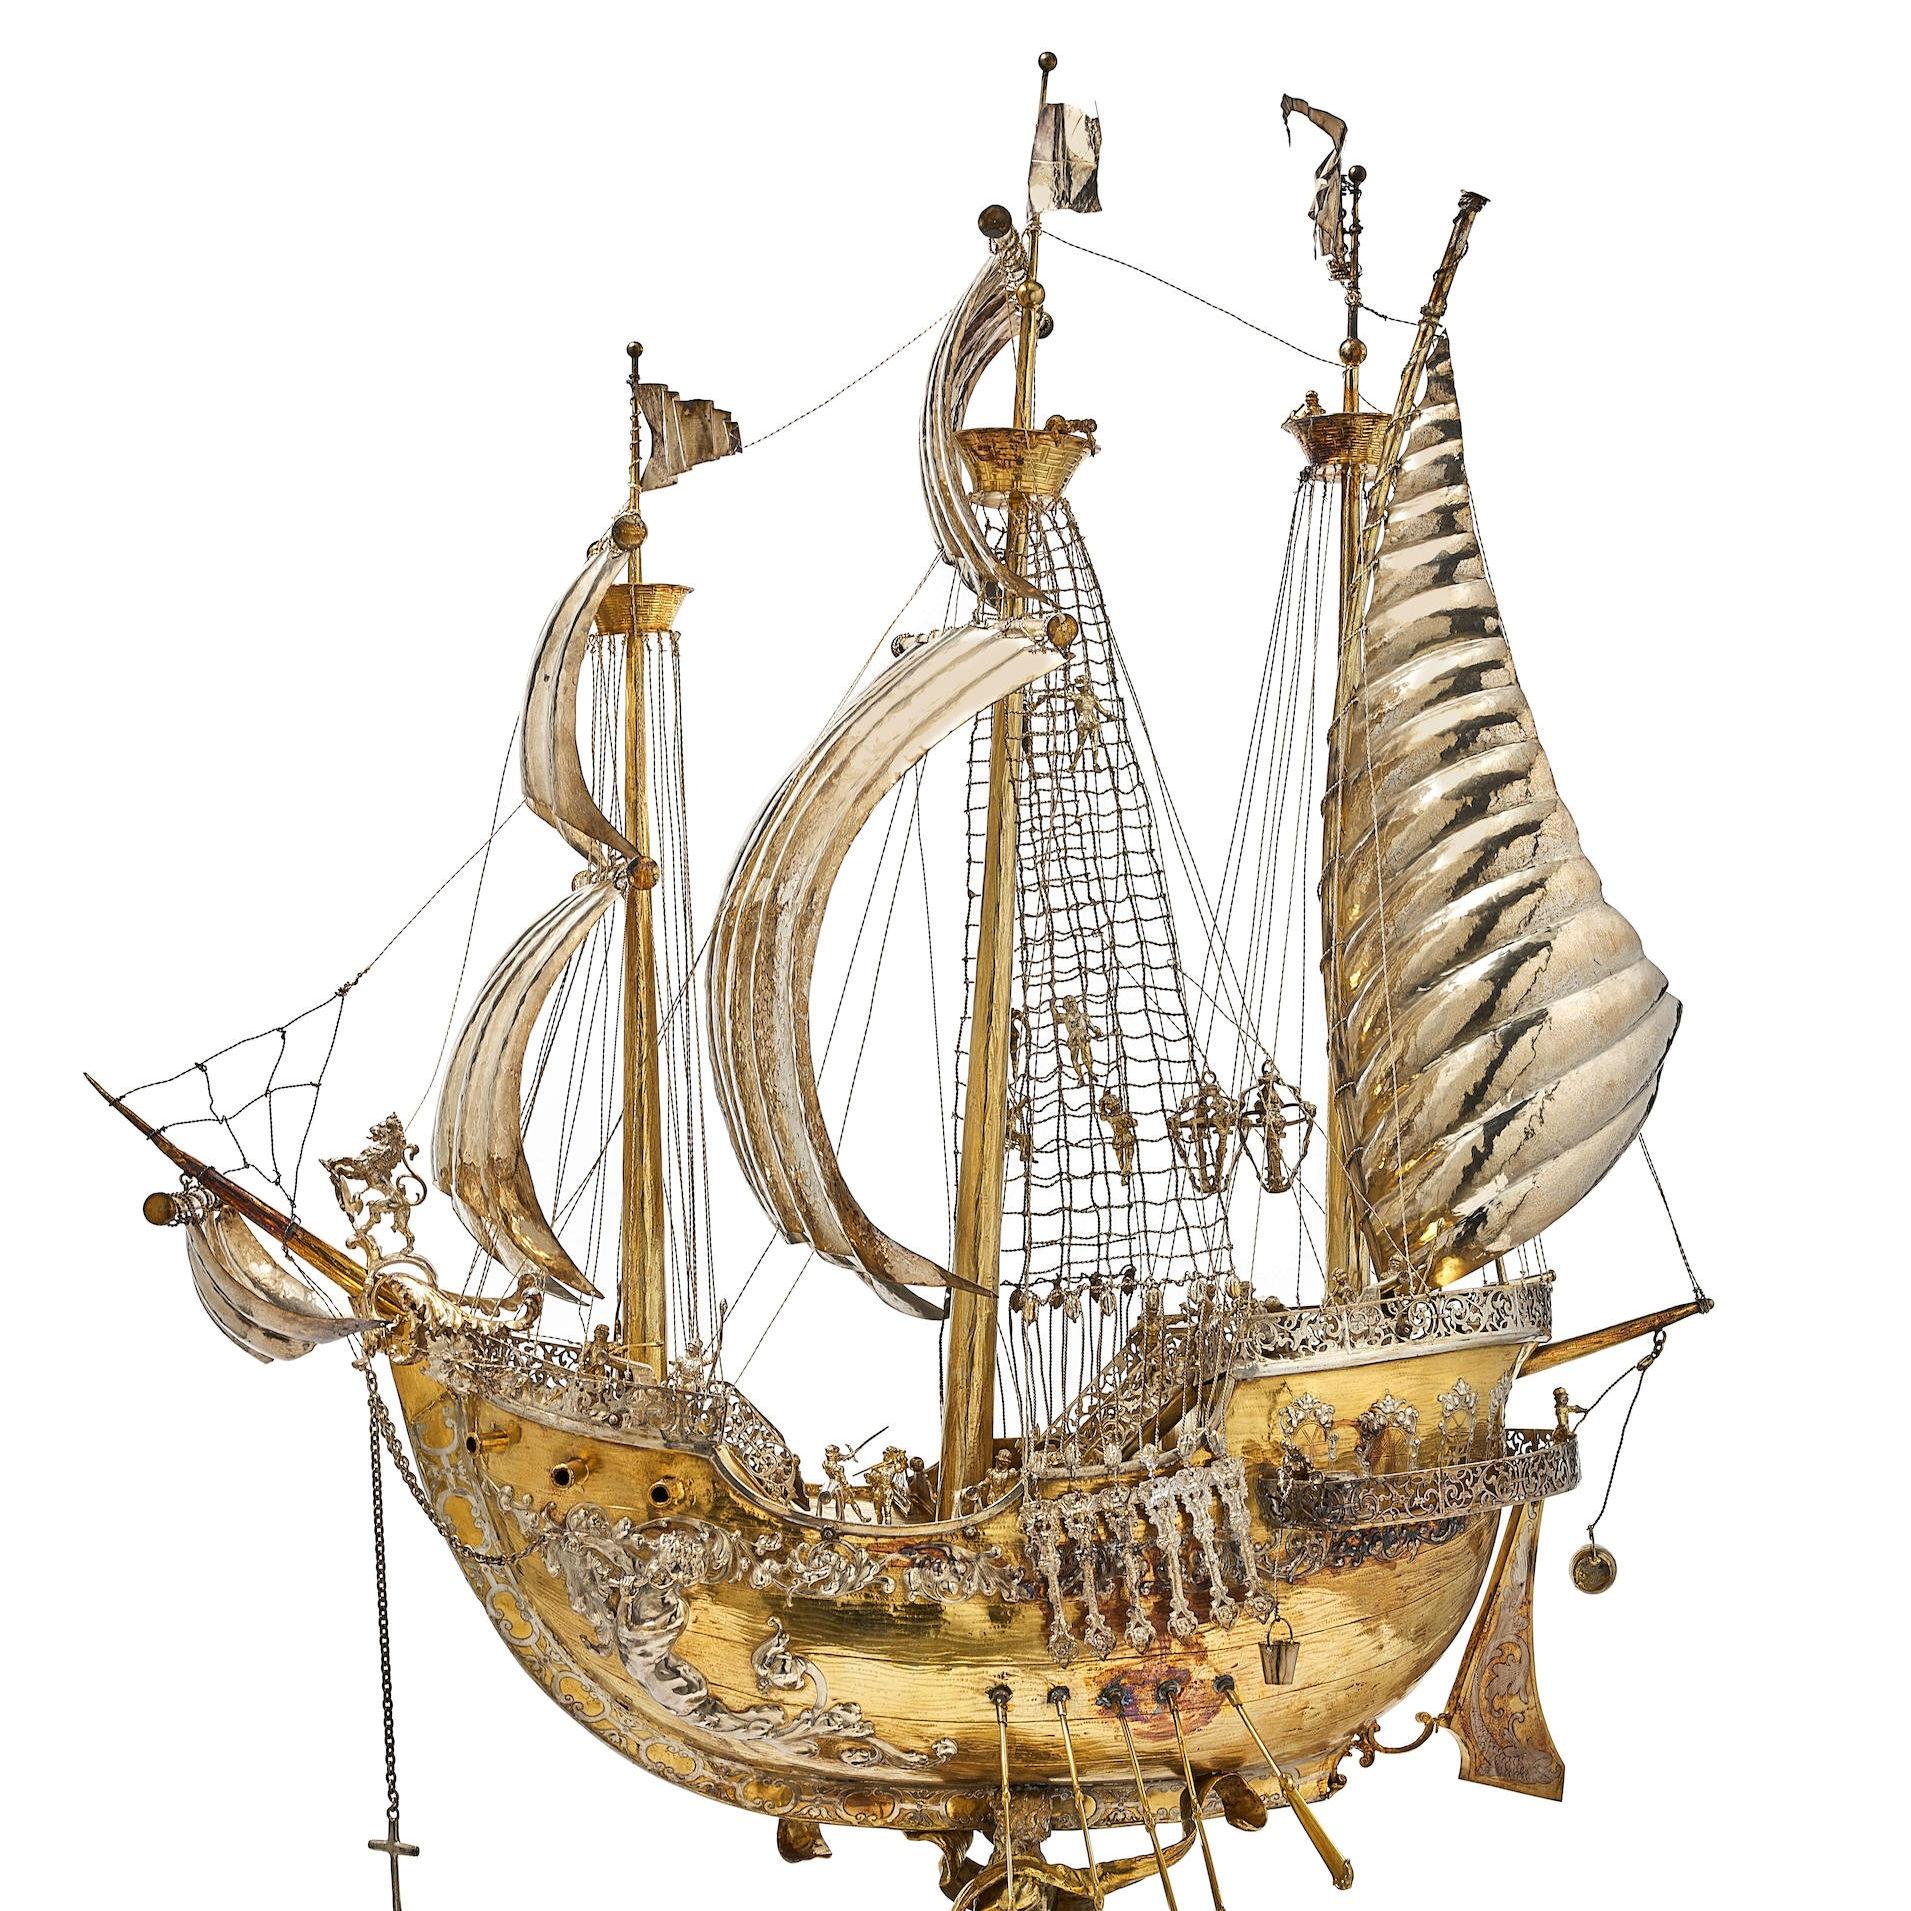 Our monumental silver gilt Schlüsselfelder ship or nef, attributed to Hanau, Germany, late 19th to early 20th century, measures an impressive 45 1/4 inches (115 cm) tall and is exquisitely modeled in the 17th century style as a galleon at sail  with